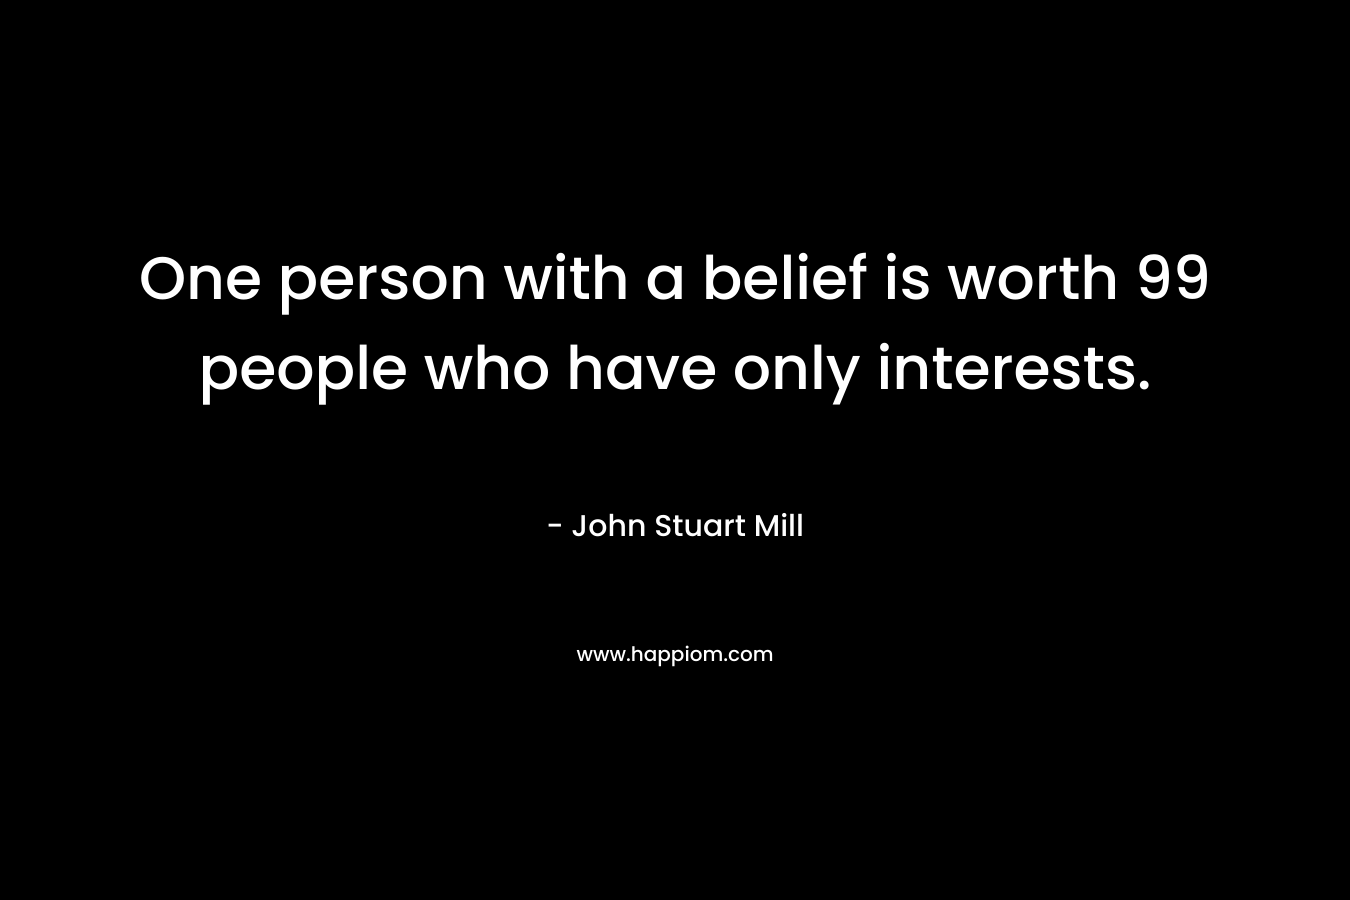 One person with a belief is worth 99 people who have only interests.